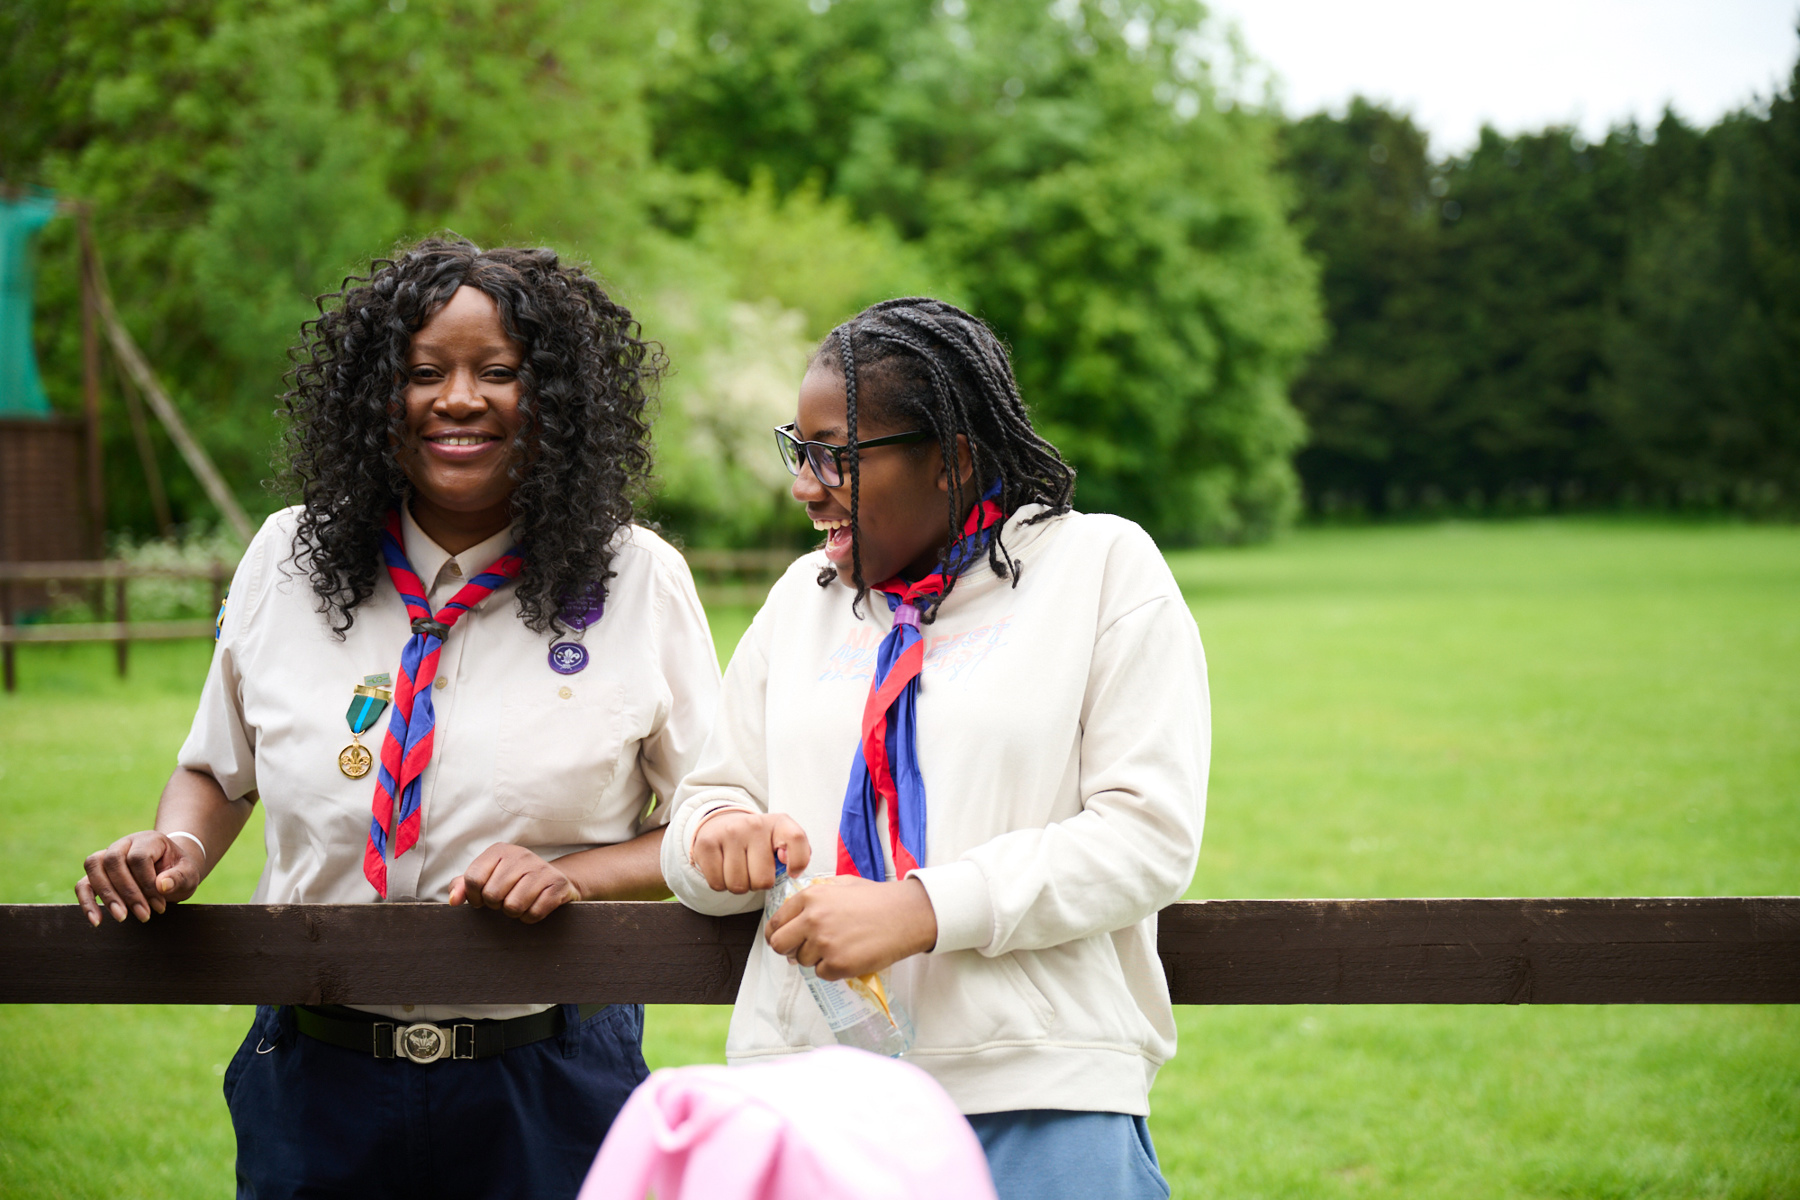 Two Black Scout volunteers are stood on grass. The volunteer on the left is behind a brown fence, while the volunteer on the right is in front of the fence and leaning on it. The volunteer on the left is smiling and looking at the camera, but the one on the right is laughing and looking to the left. 